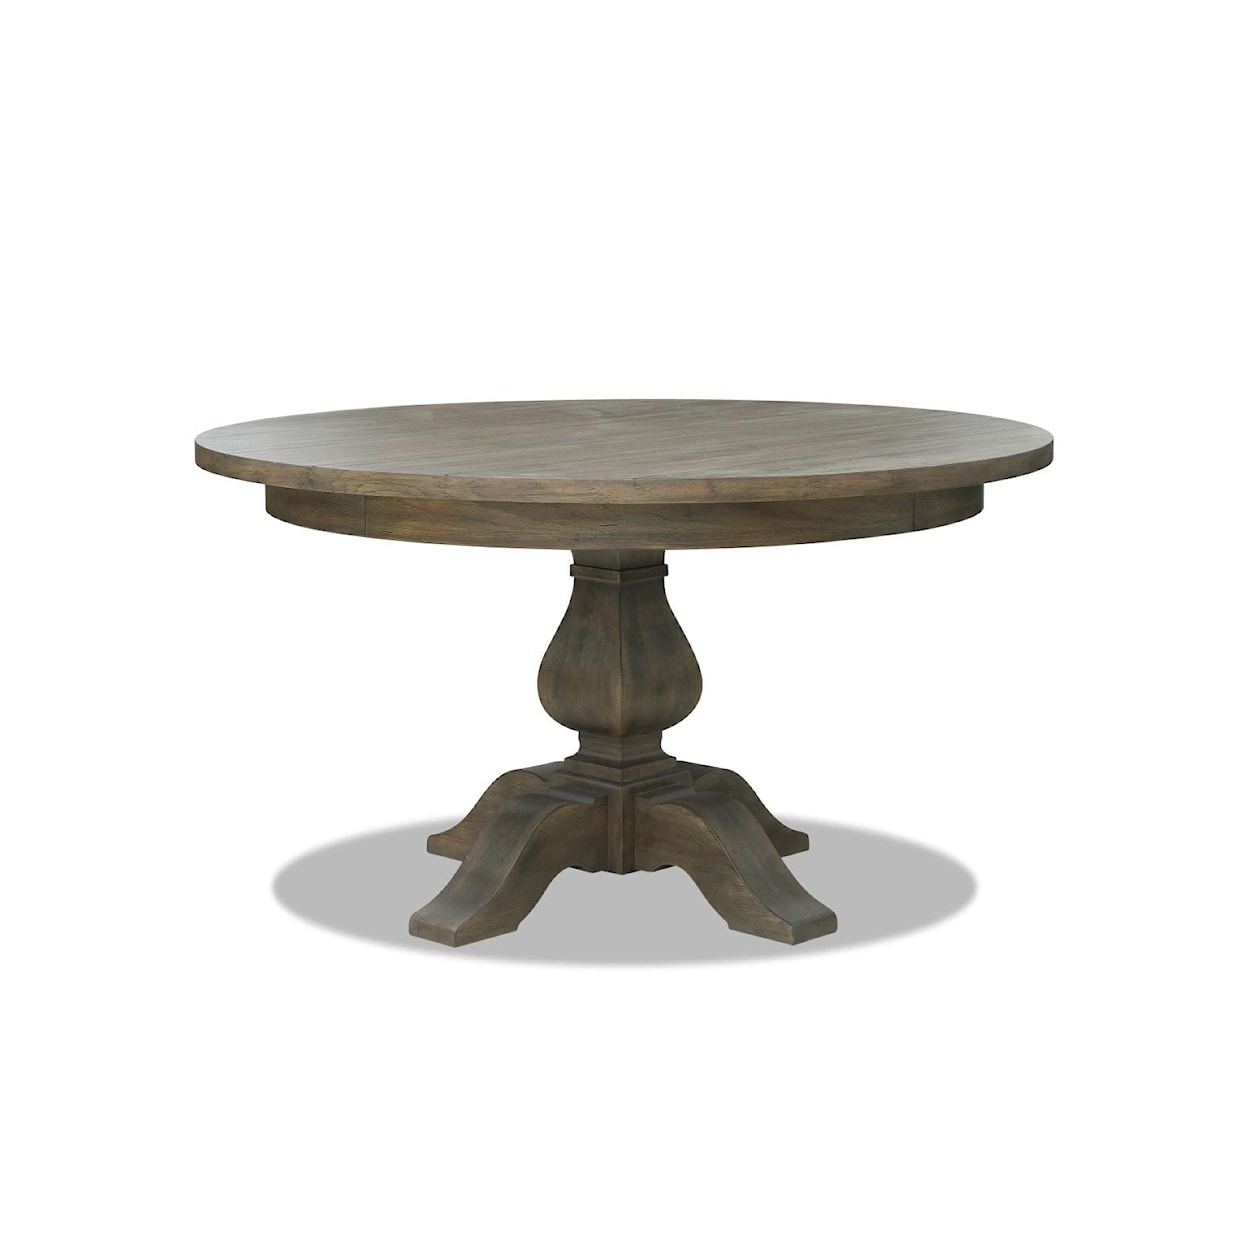 Trisha Yearwood Home Collection by Legacy Classic Hometown Round Dining Table